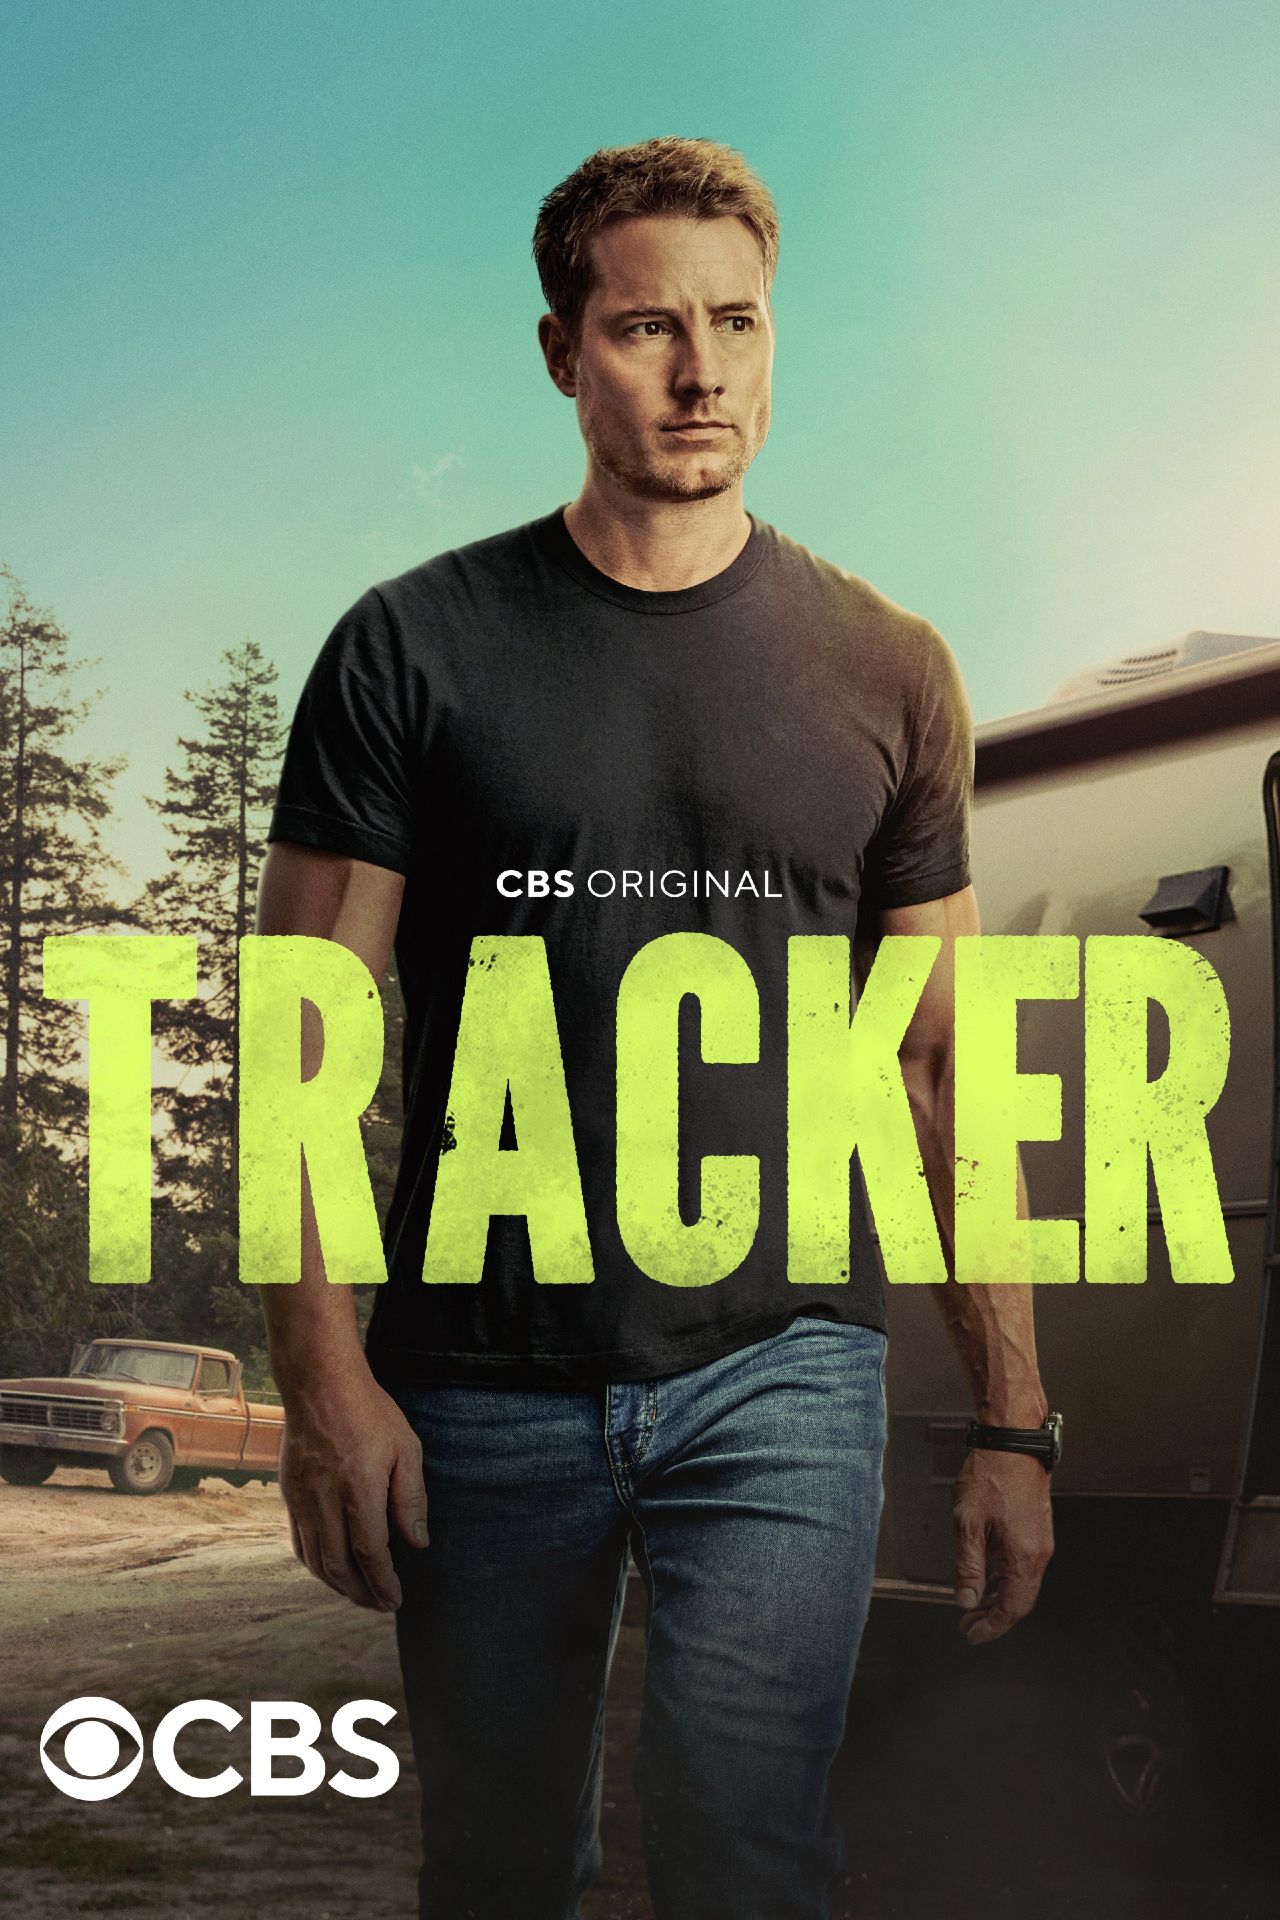 Tracker’s Jensen Ackles Casting Is Great, But I Hope It Copies The